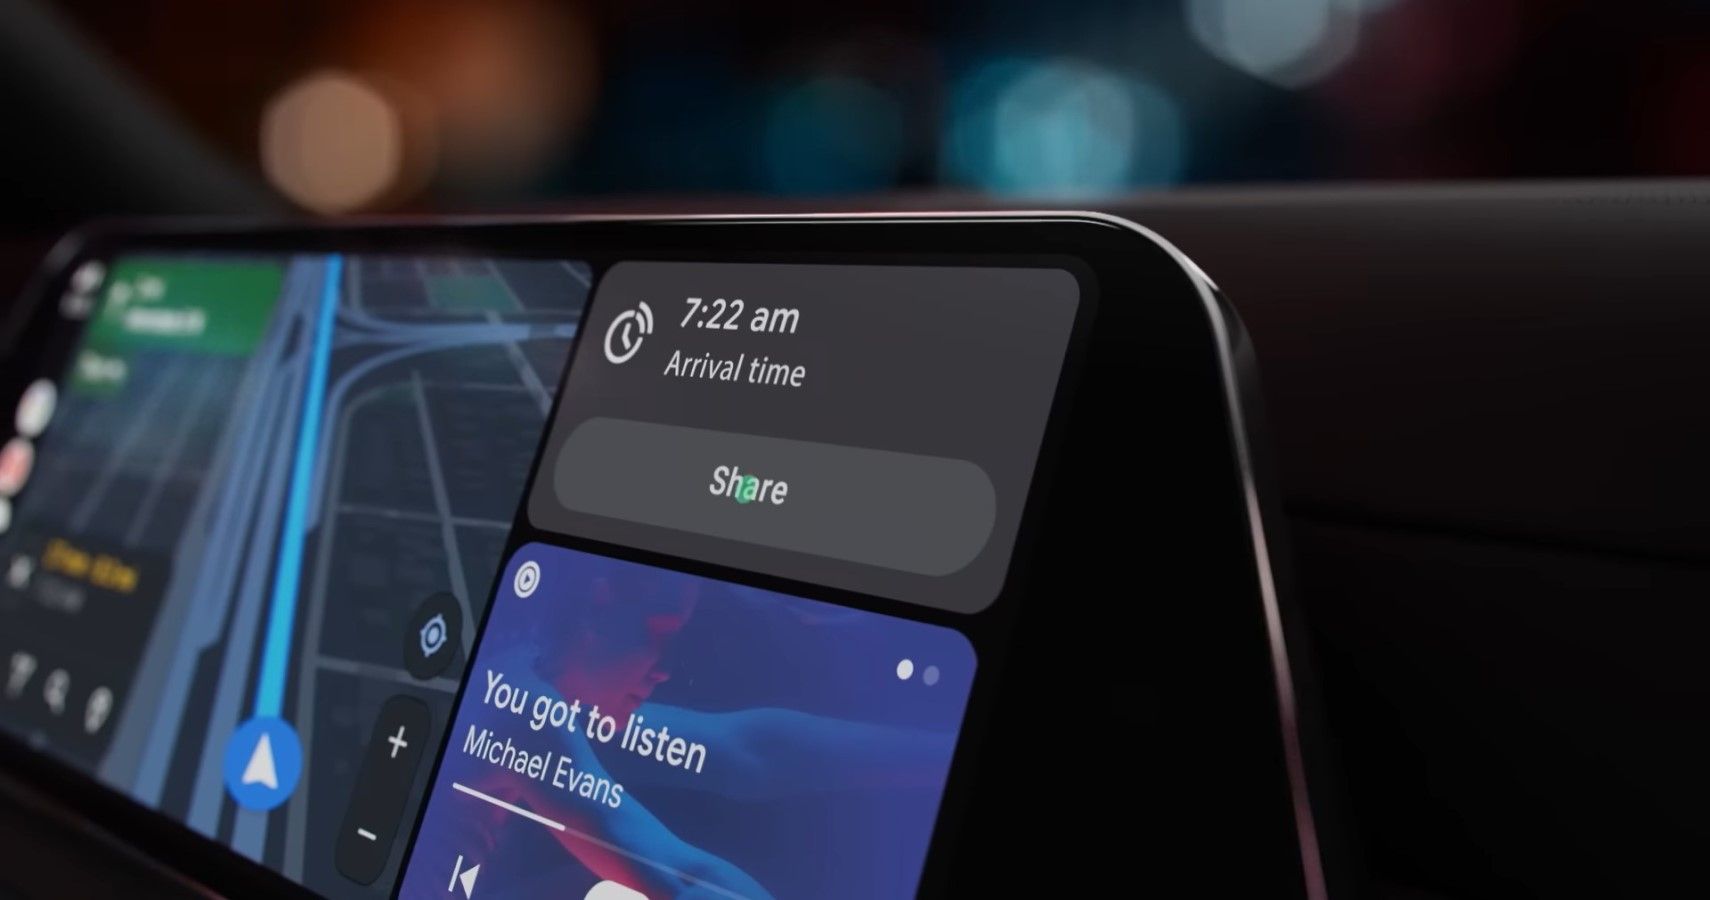 All-new Android Auto to show reminders as popups